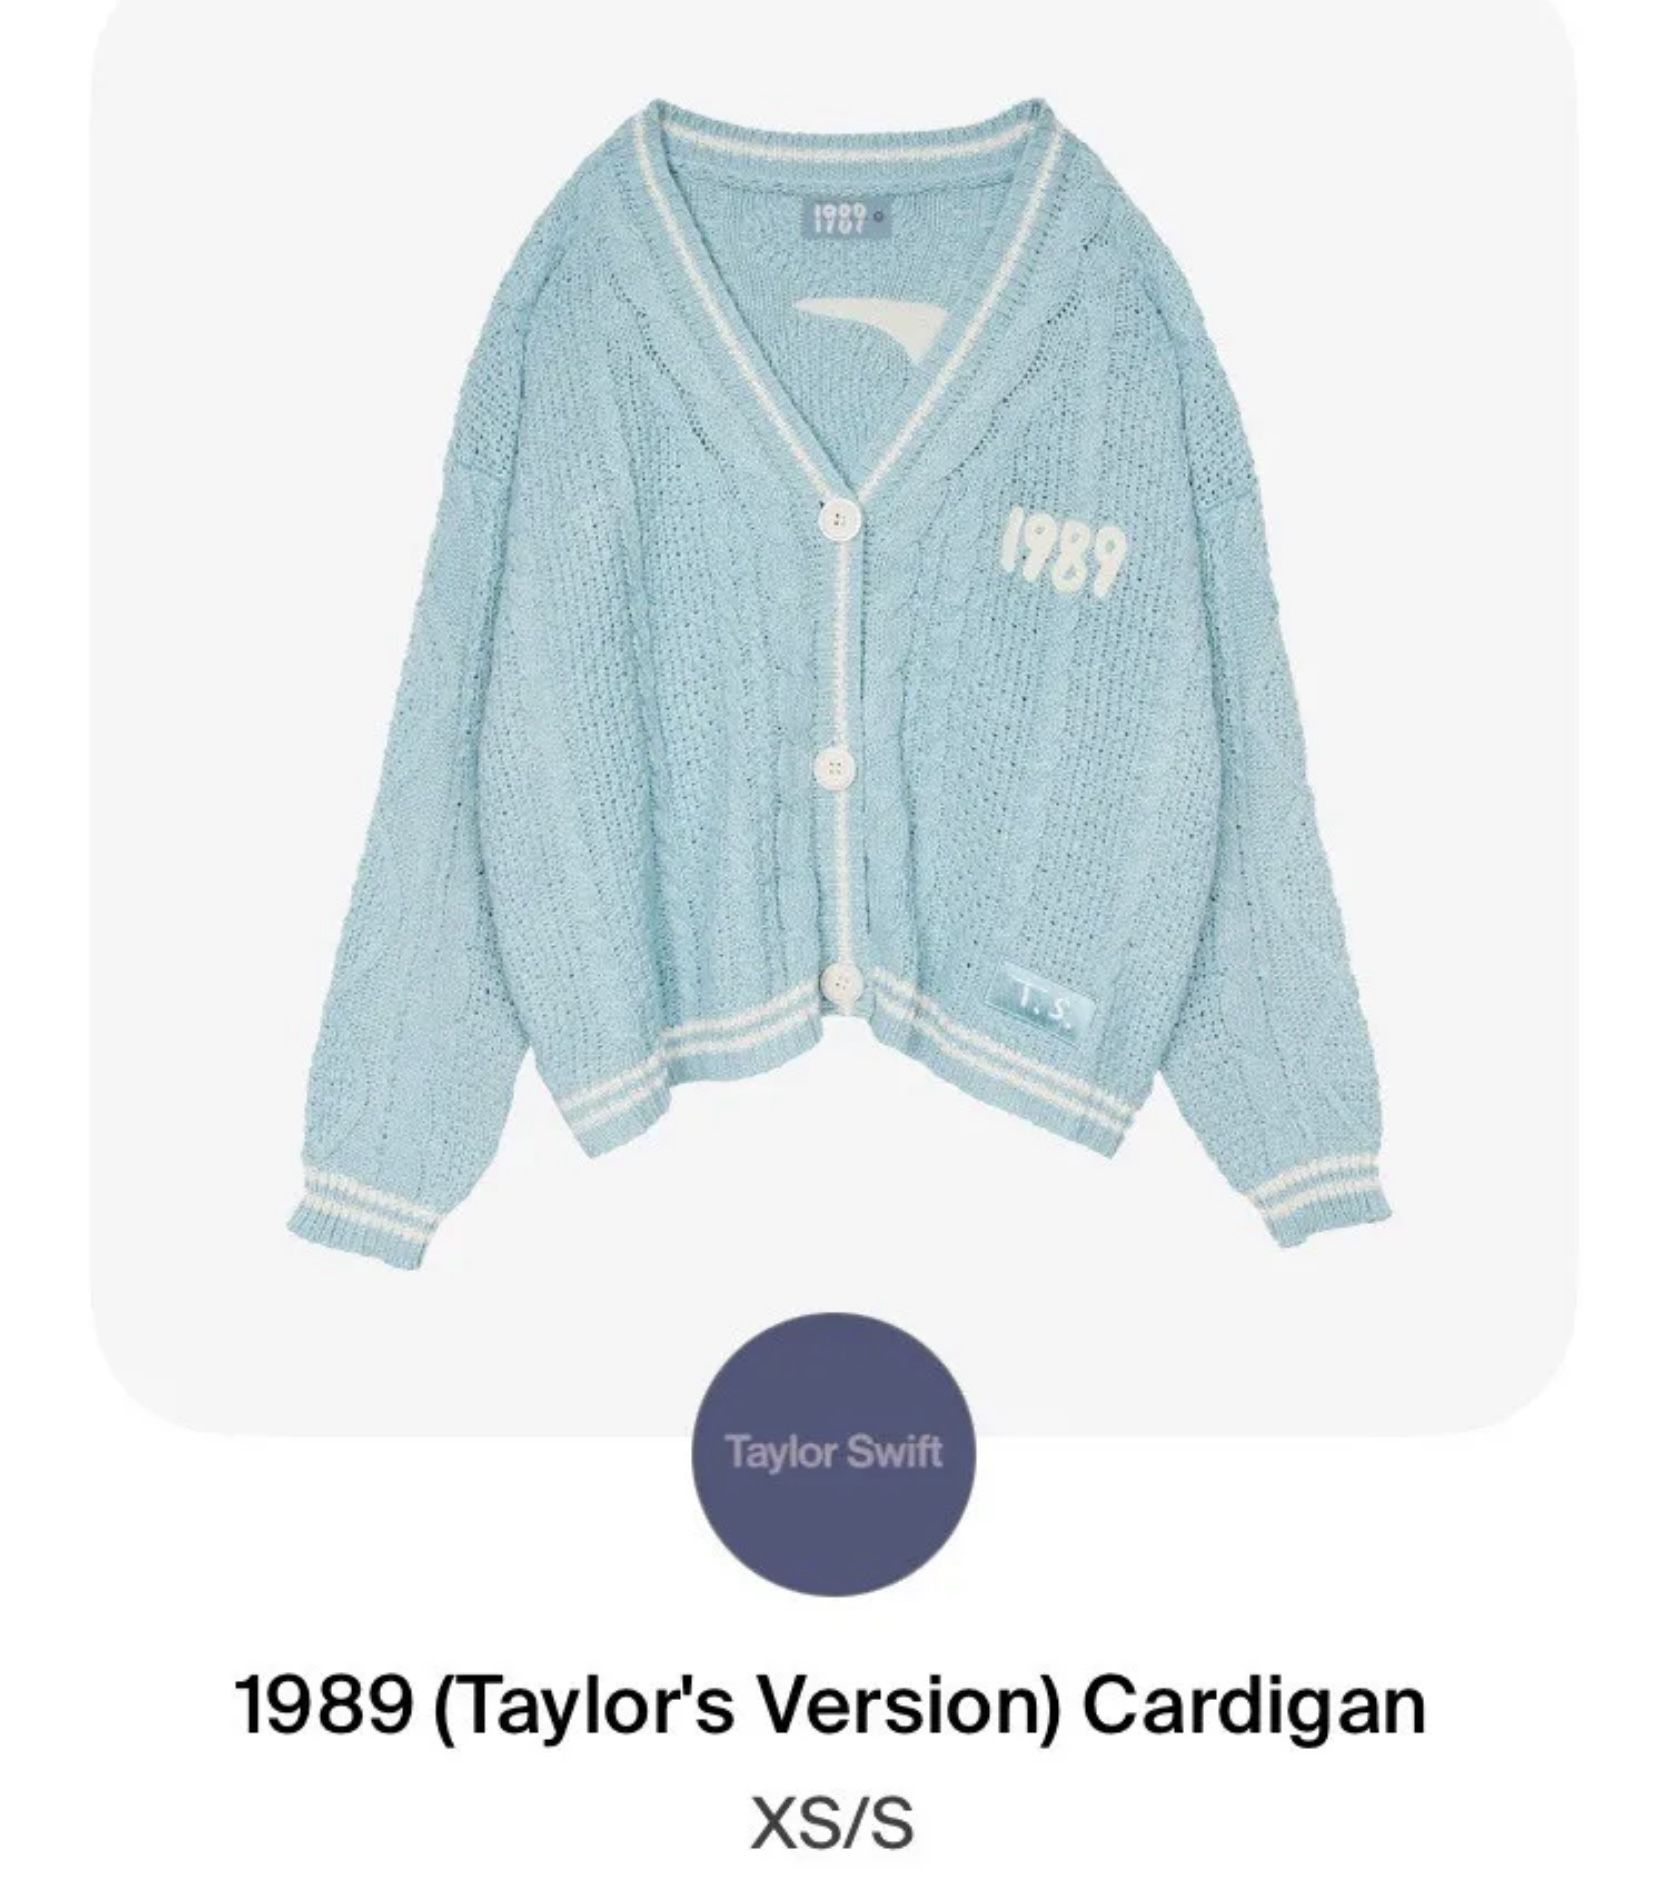 Authentic Taylor Swift Cardigan 1989, Light Blue -NWT-Size MD/LRG